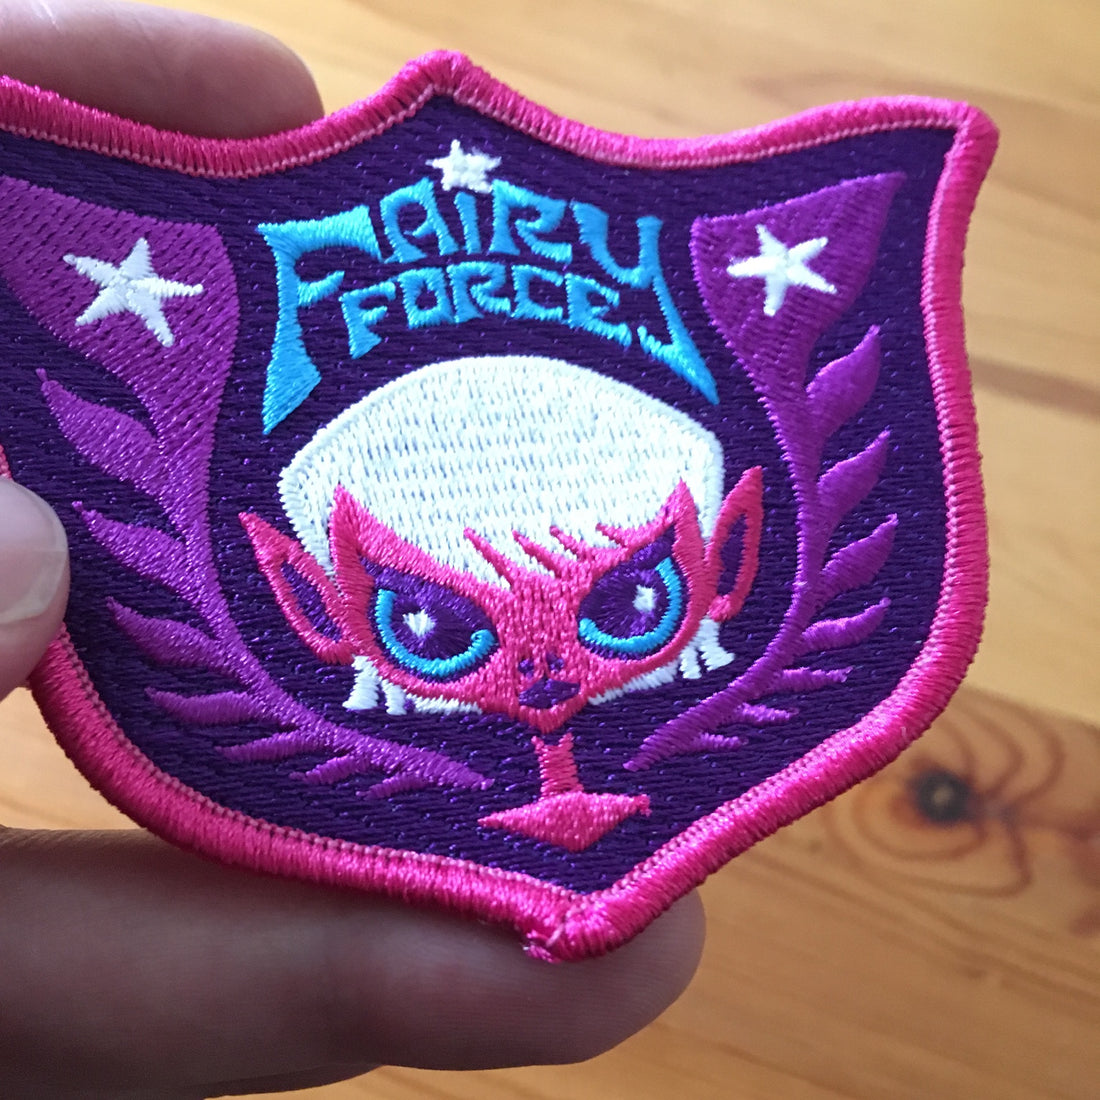 Fairy Force embroidered patch redesign now available!